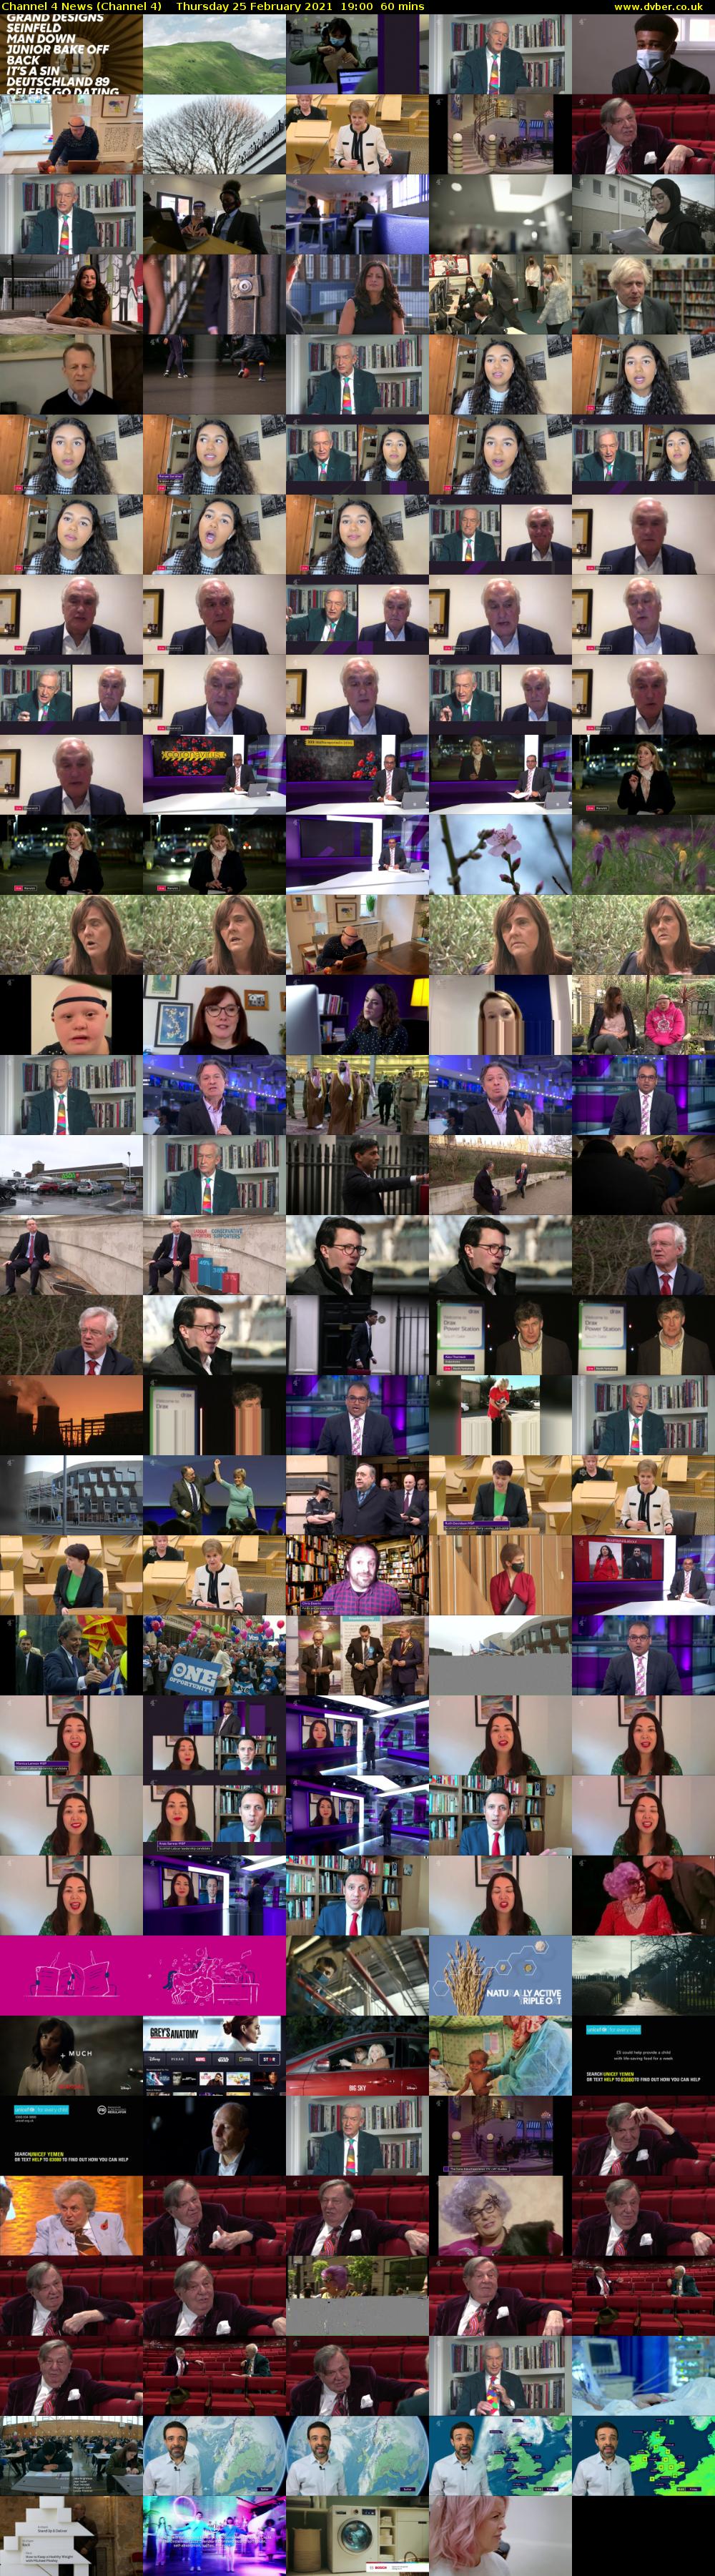 Channel 4 News (Channel 4) Thursday 25 February 2021 19:00 - 20:00